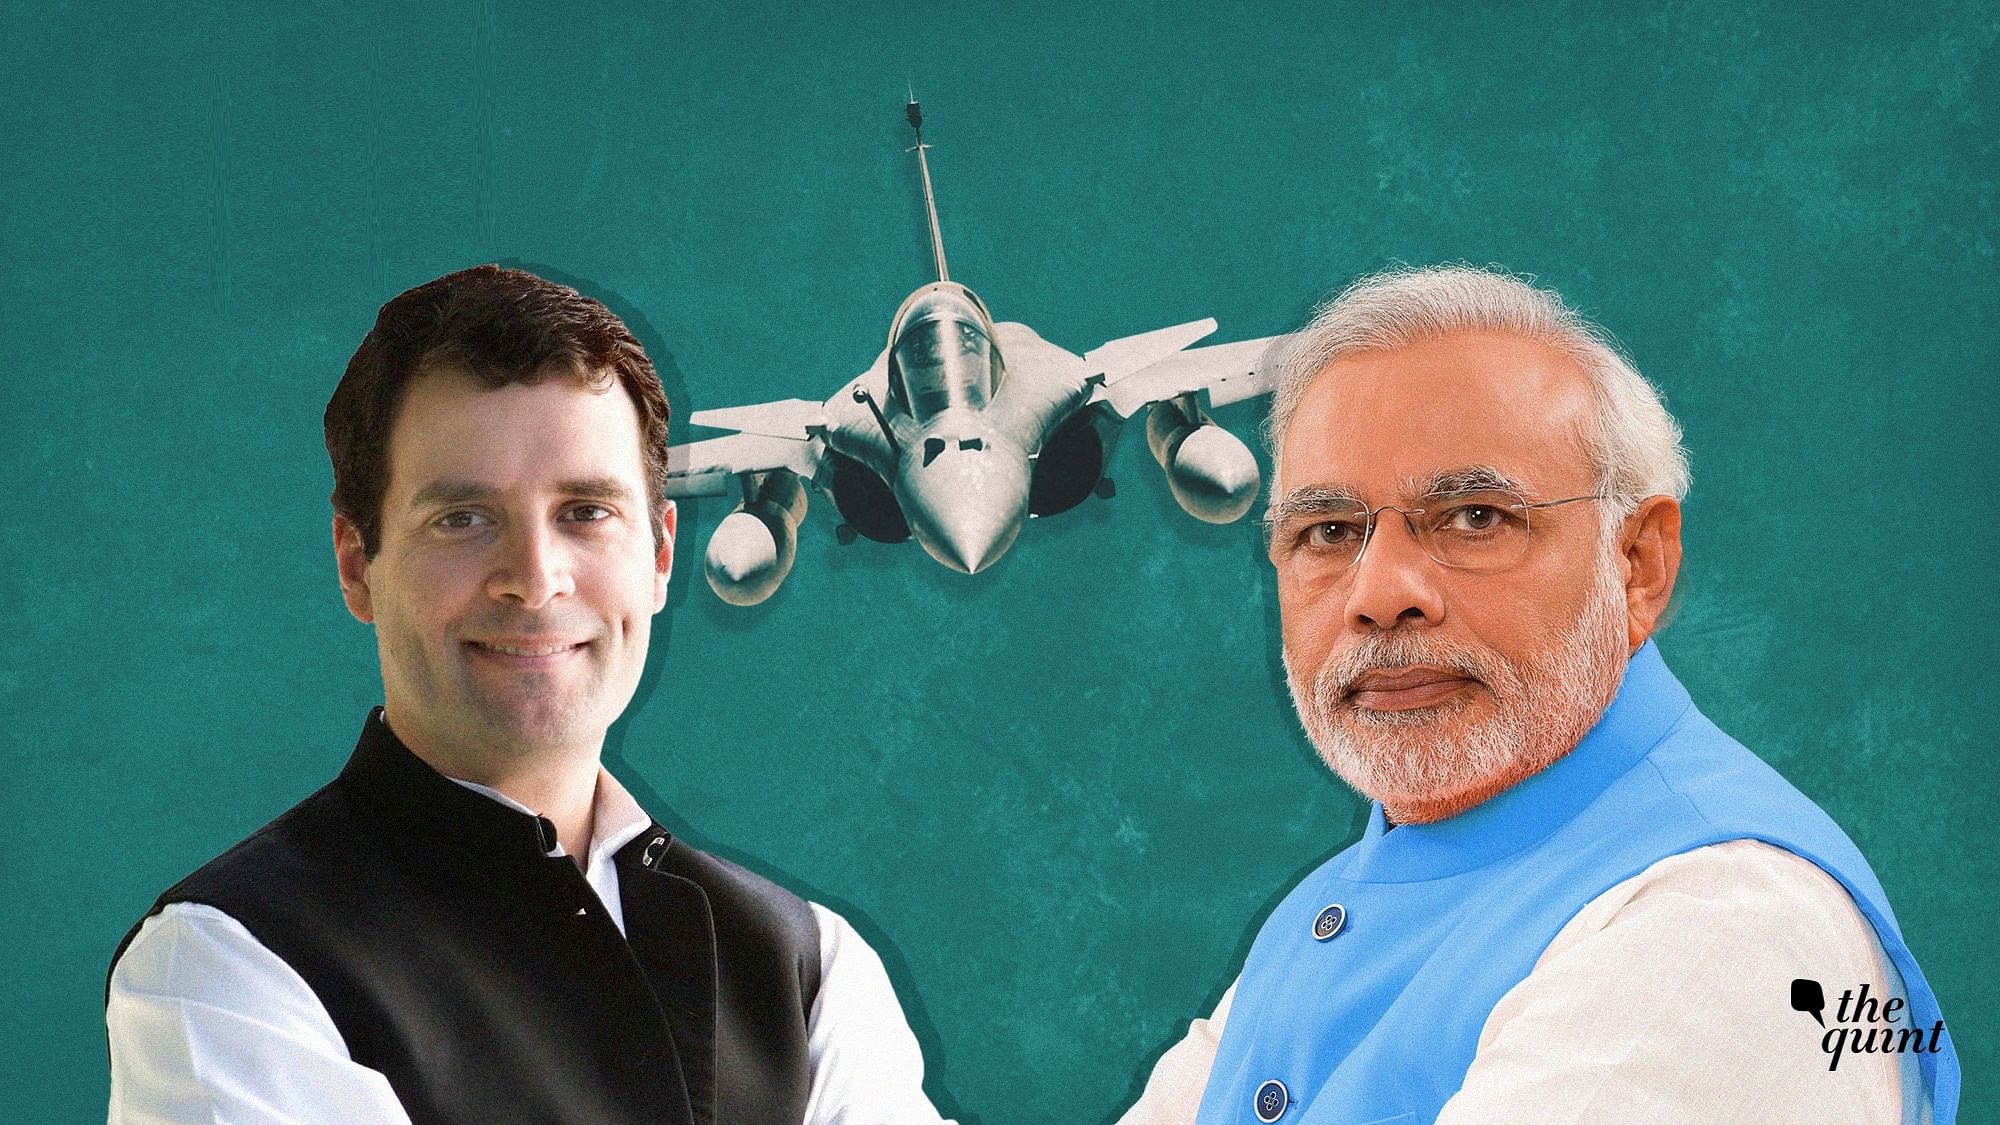 There seems to be a problem with the Rafale deal for which the country deserves a clear-cut explanation from the Centre.